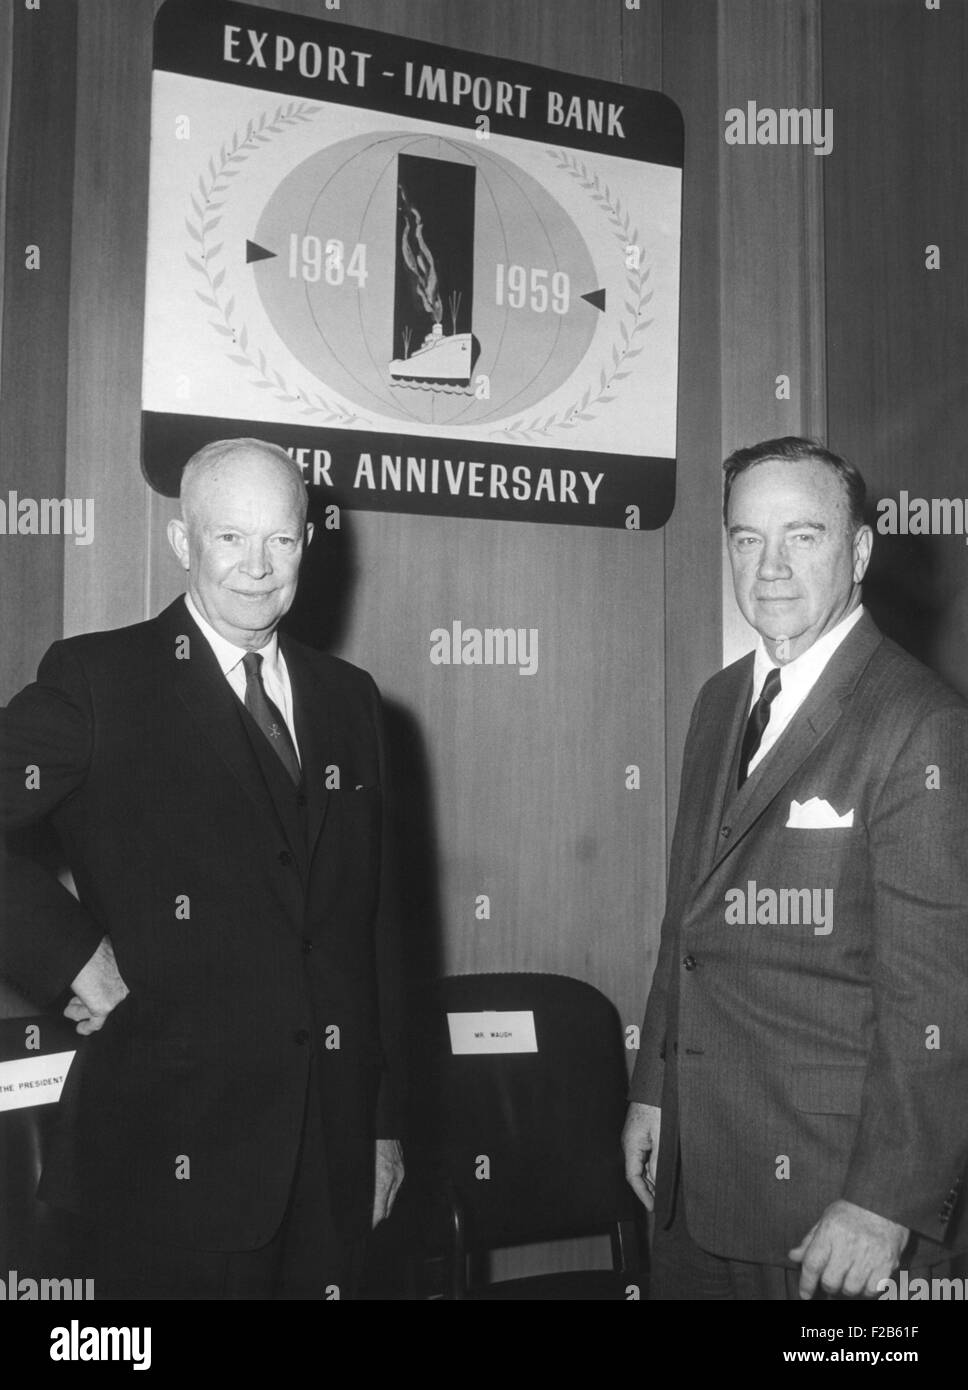 President Eisenhower with Samuel Waugh of the Export-Import Bank on its 25th anniversary. Feb. 12, 1959. Samuel Waugh was President and Chairman of the Board of the Export-Import Bank of Washington. - (BSLOC 2014 16 181) Stock Photo